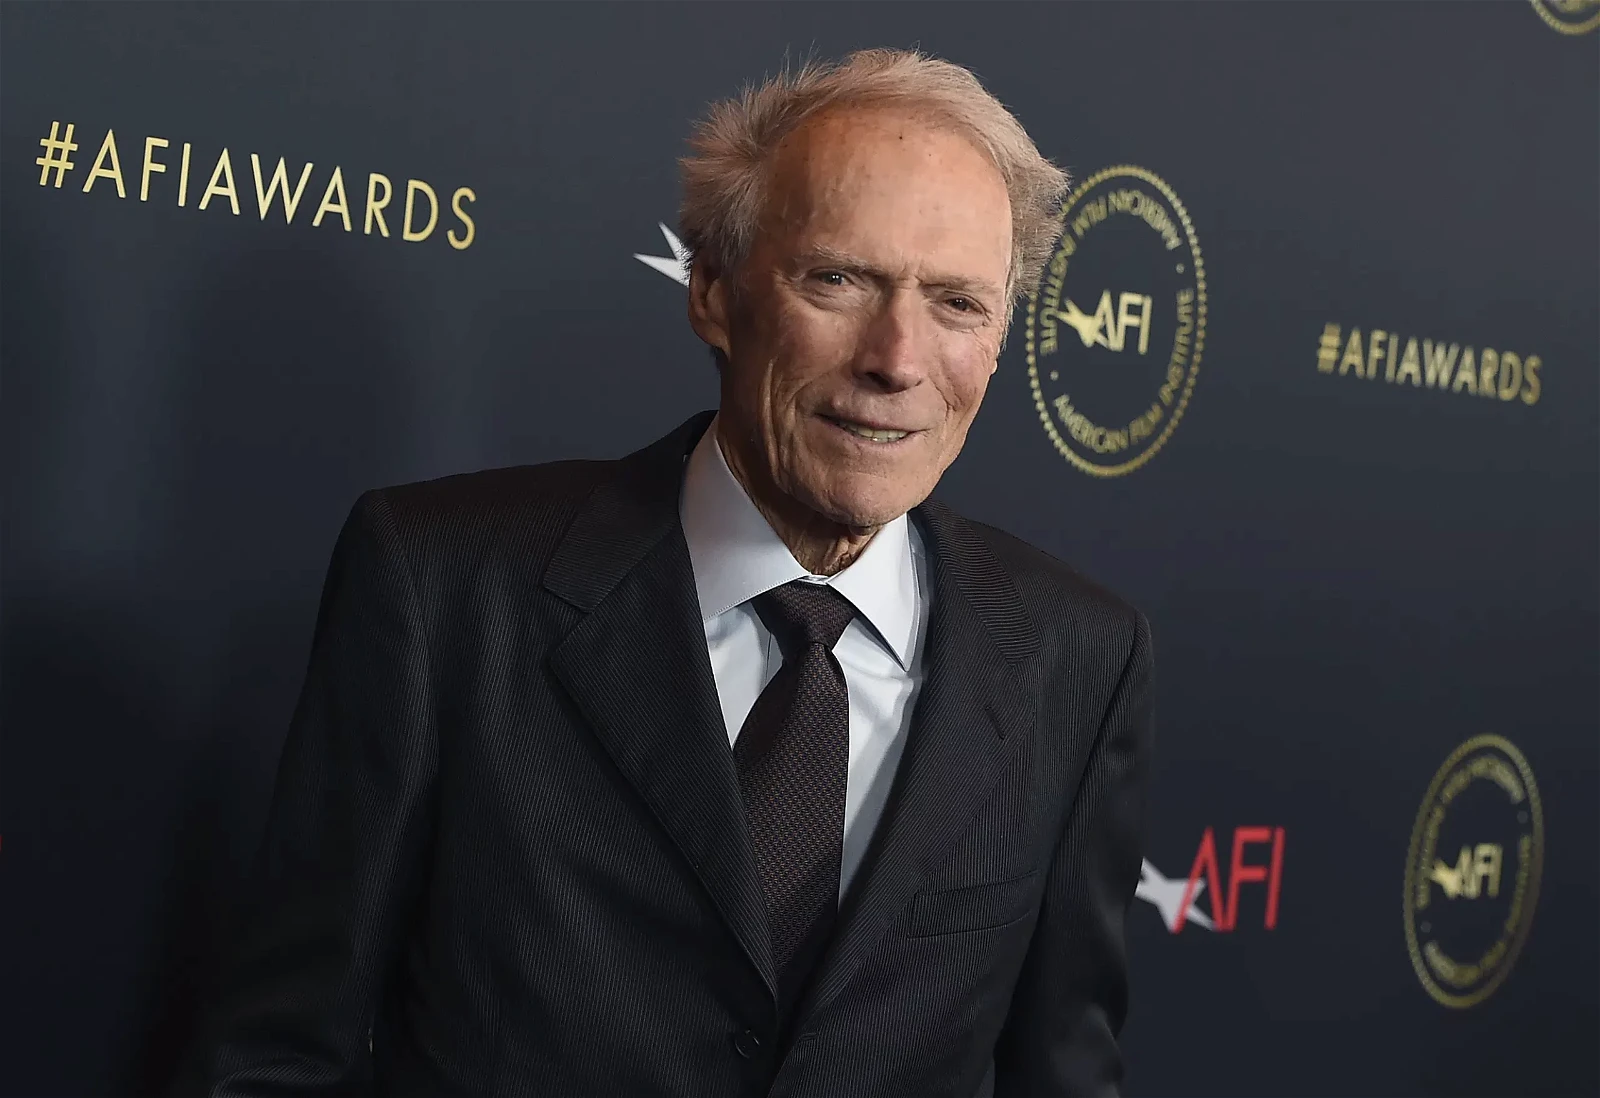 Clint Eastwood opens up about missed opportunities